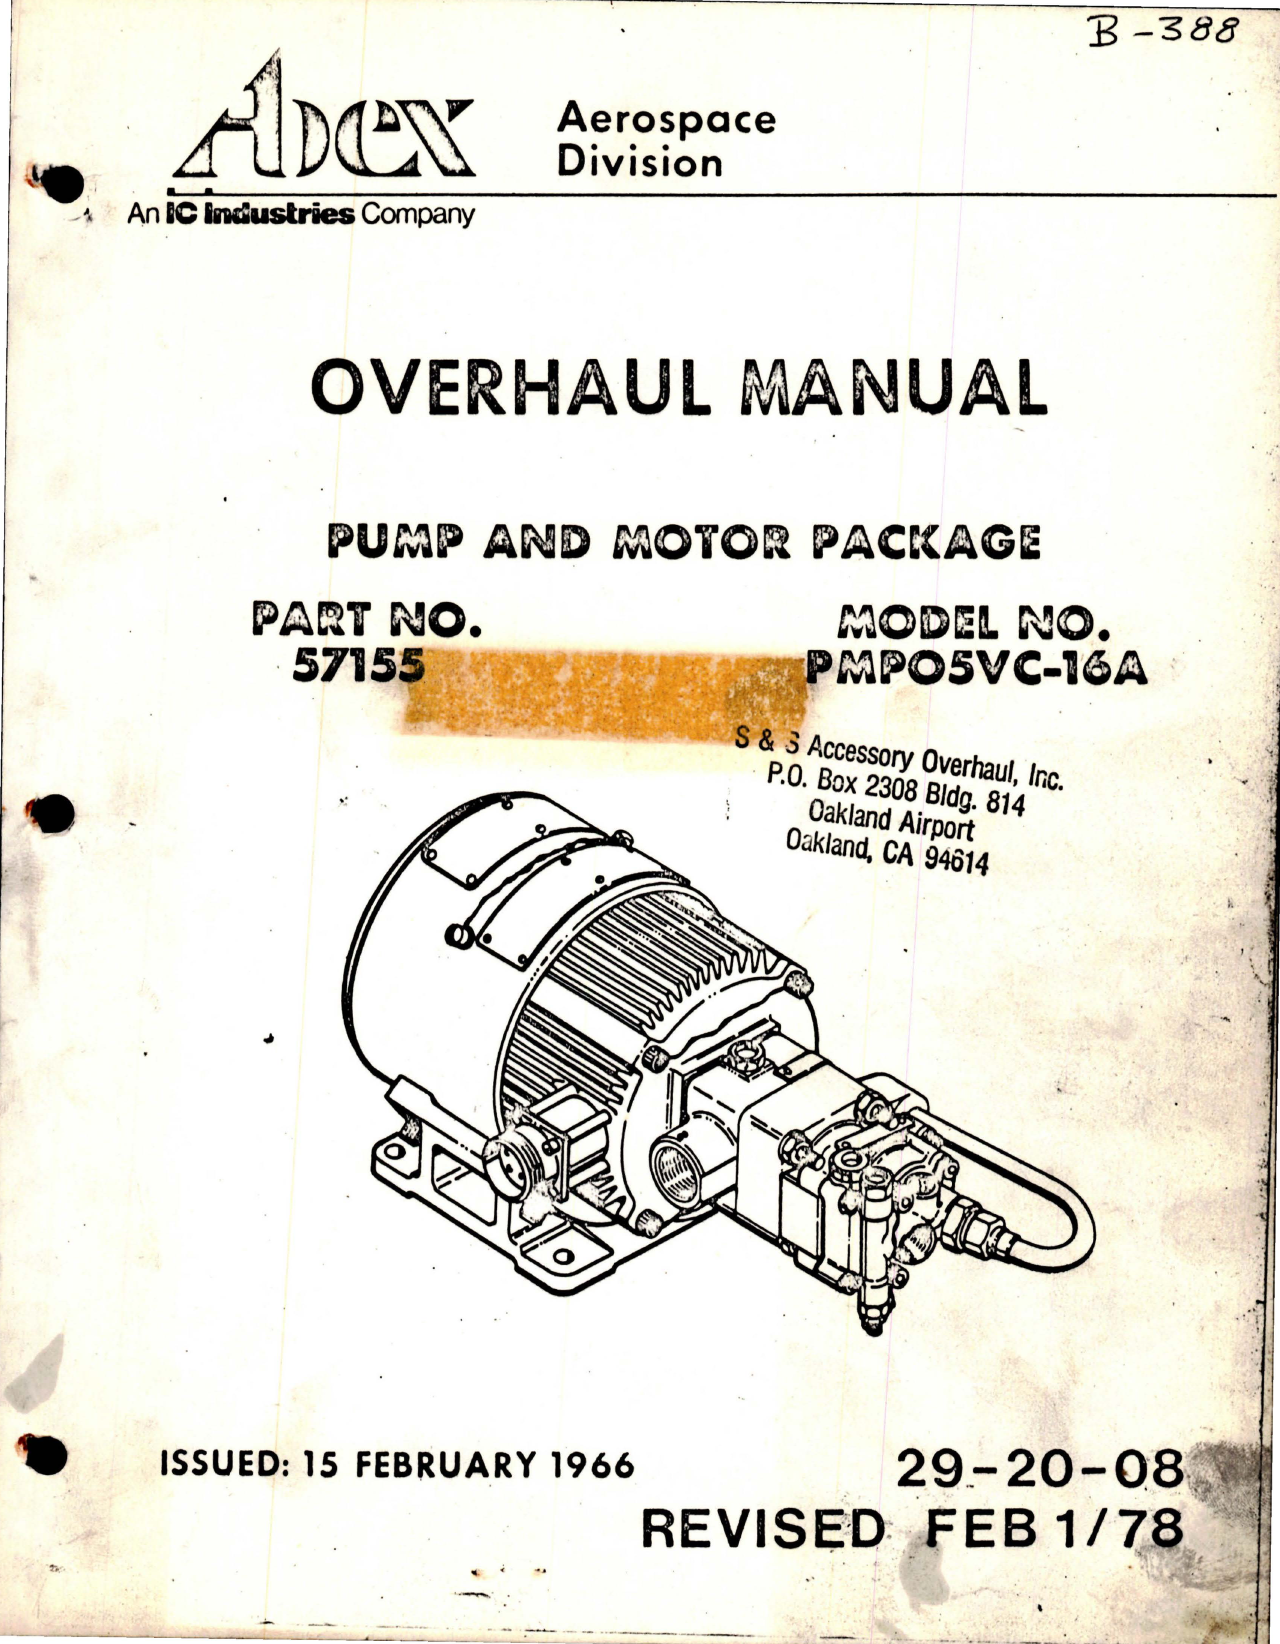 Sample page 1 from AirCorps Library document: Overhaul Manual for Pump and Motor Package - Part 57155 - Model PMP05VC-16A 